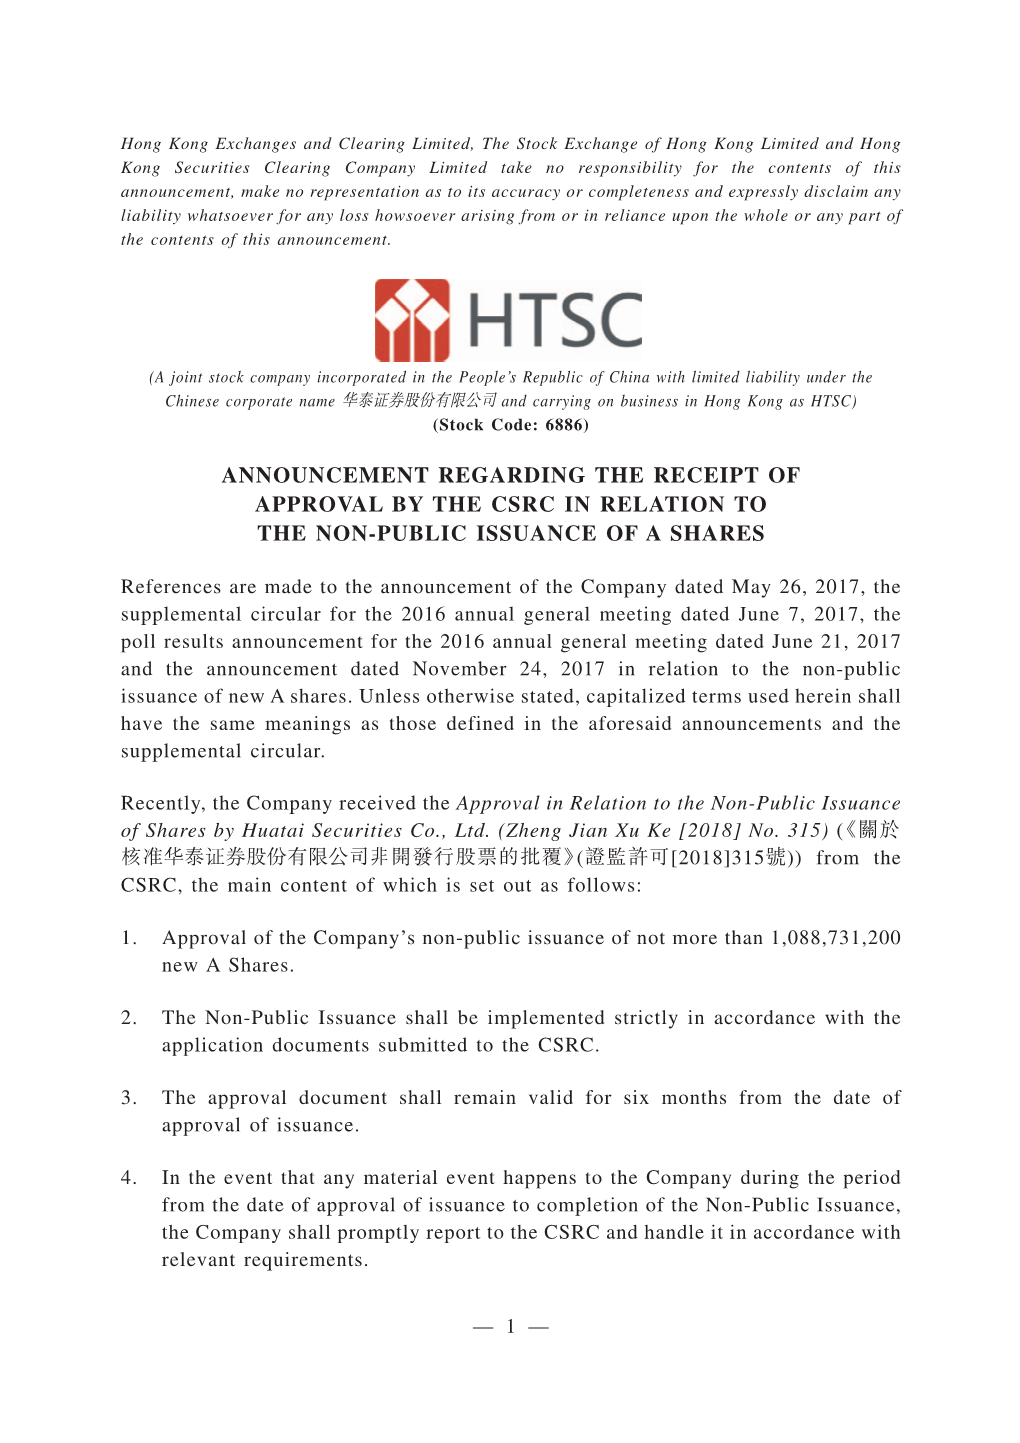 Announcement Regarding the Receipt of Approval by the Csrc in Relation to the Non-Public Issuance of a Shares